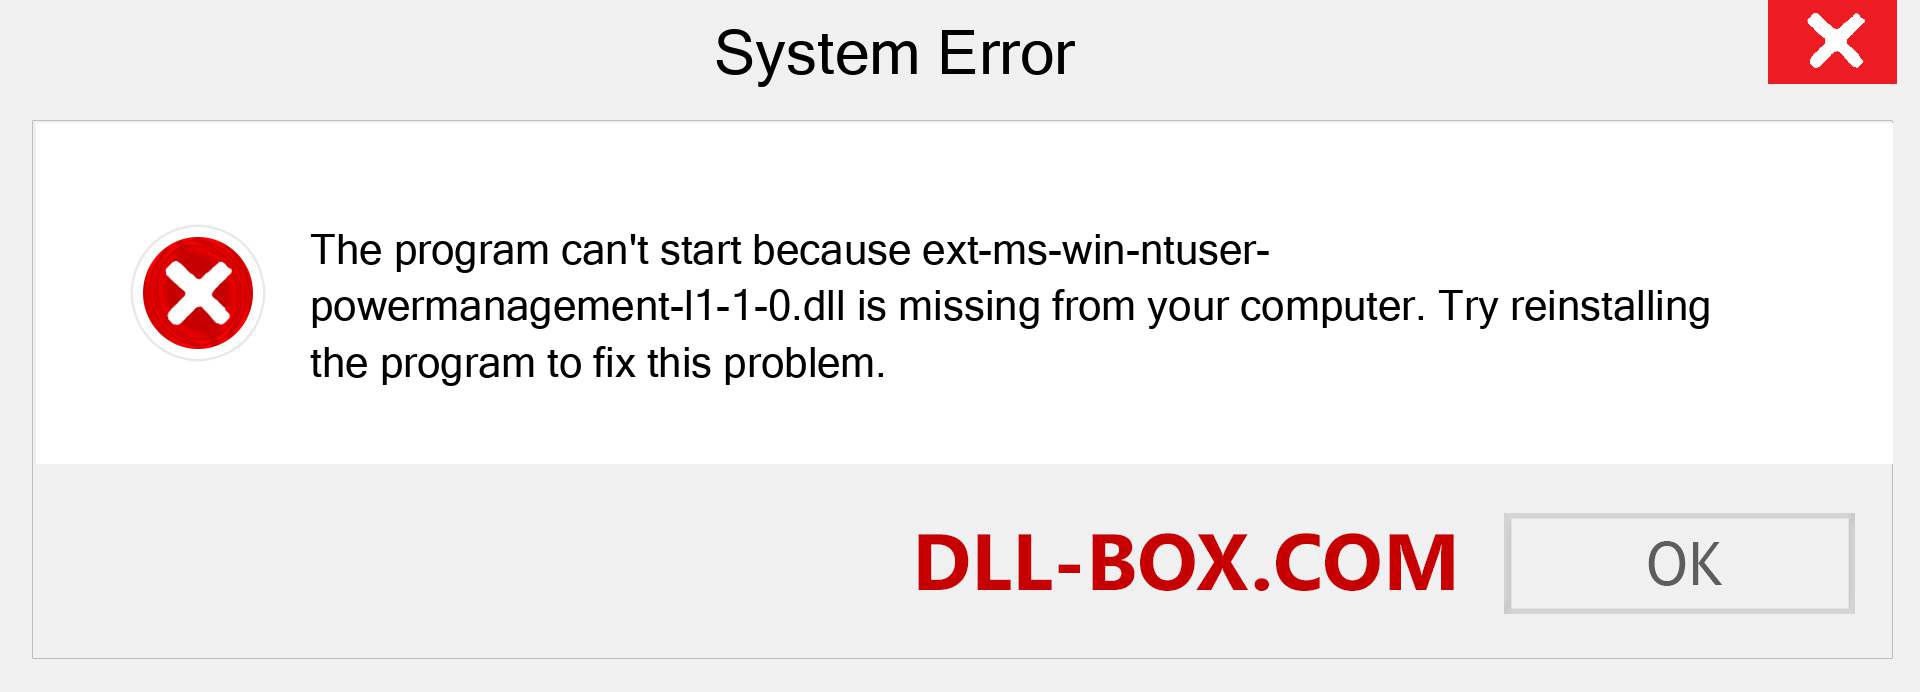  ext-ms-win-ntuser-powermanagement-l1-1-0.dll file is missing?. Download for Windows 7, 8, 10 - Fix  ext-ms-win-ntuser-powermanagement-l1-1-0 dll Missing Error on Windows, photos, images